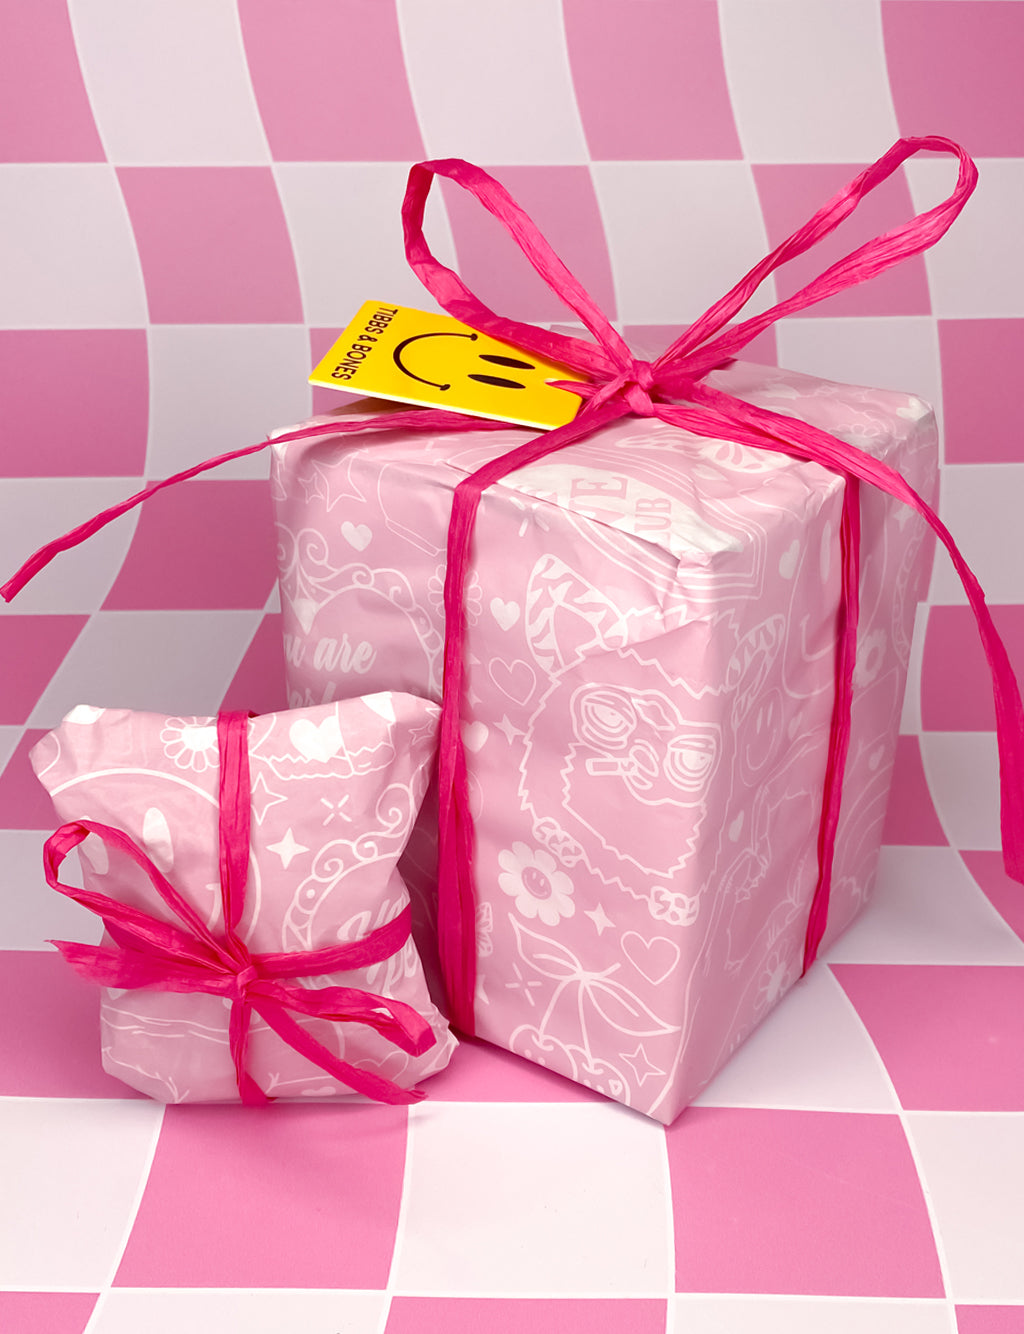 GIFT WRAPPING